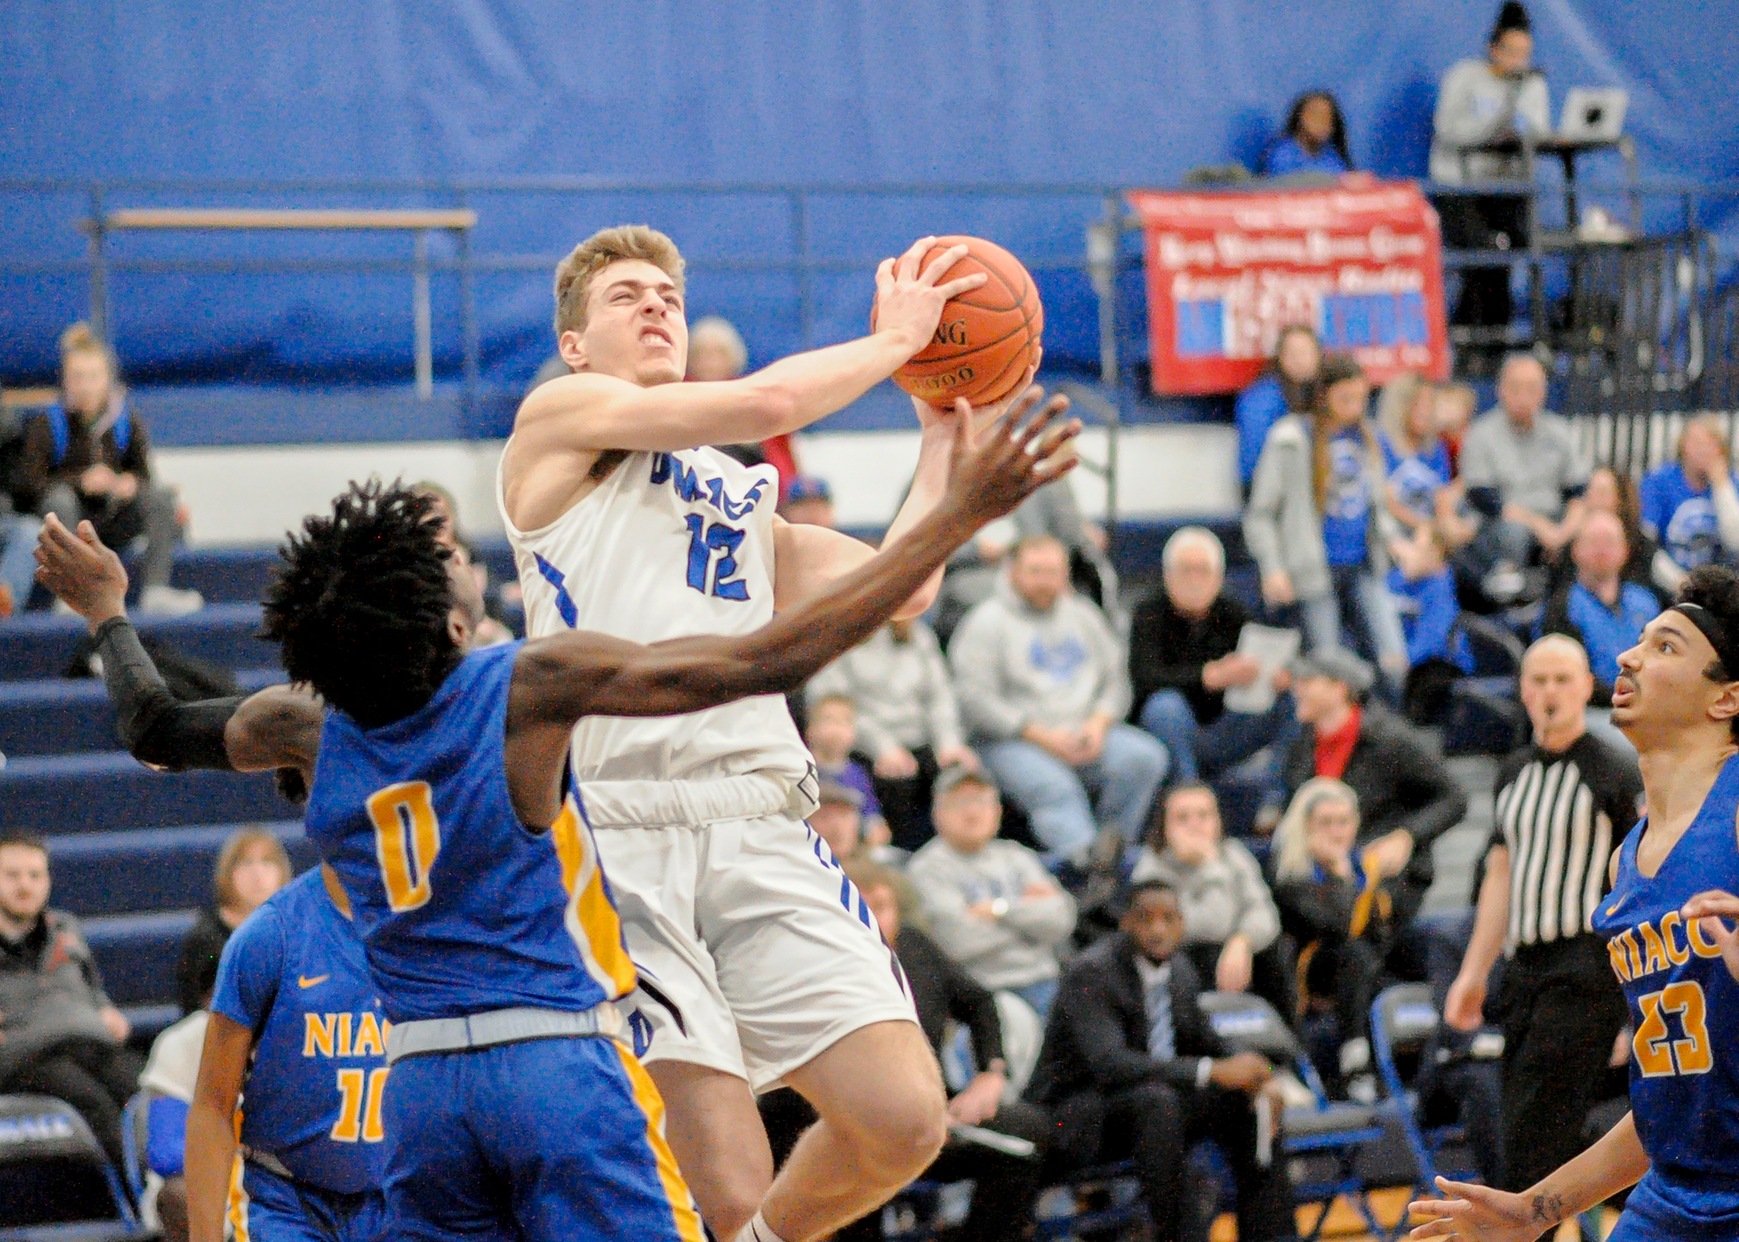 Fifth-ranked DMACC men's basketball team routs fourth-ranked NIACC, 107-63